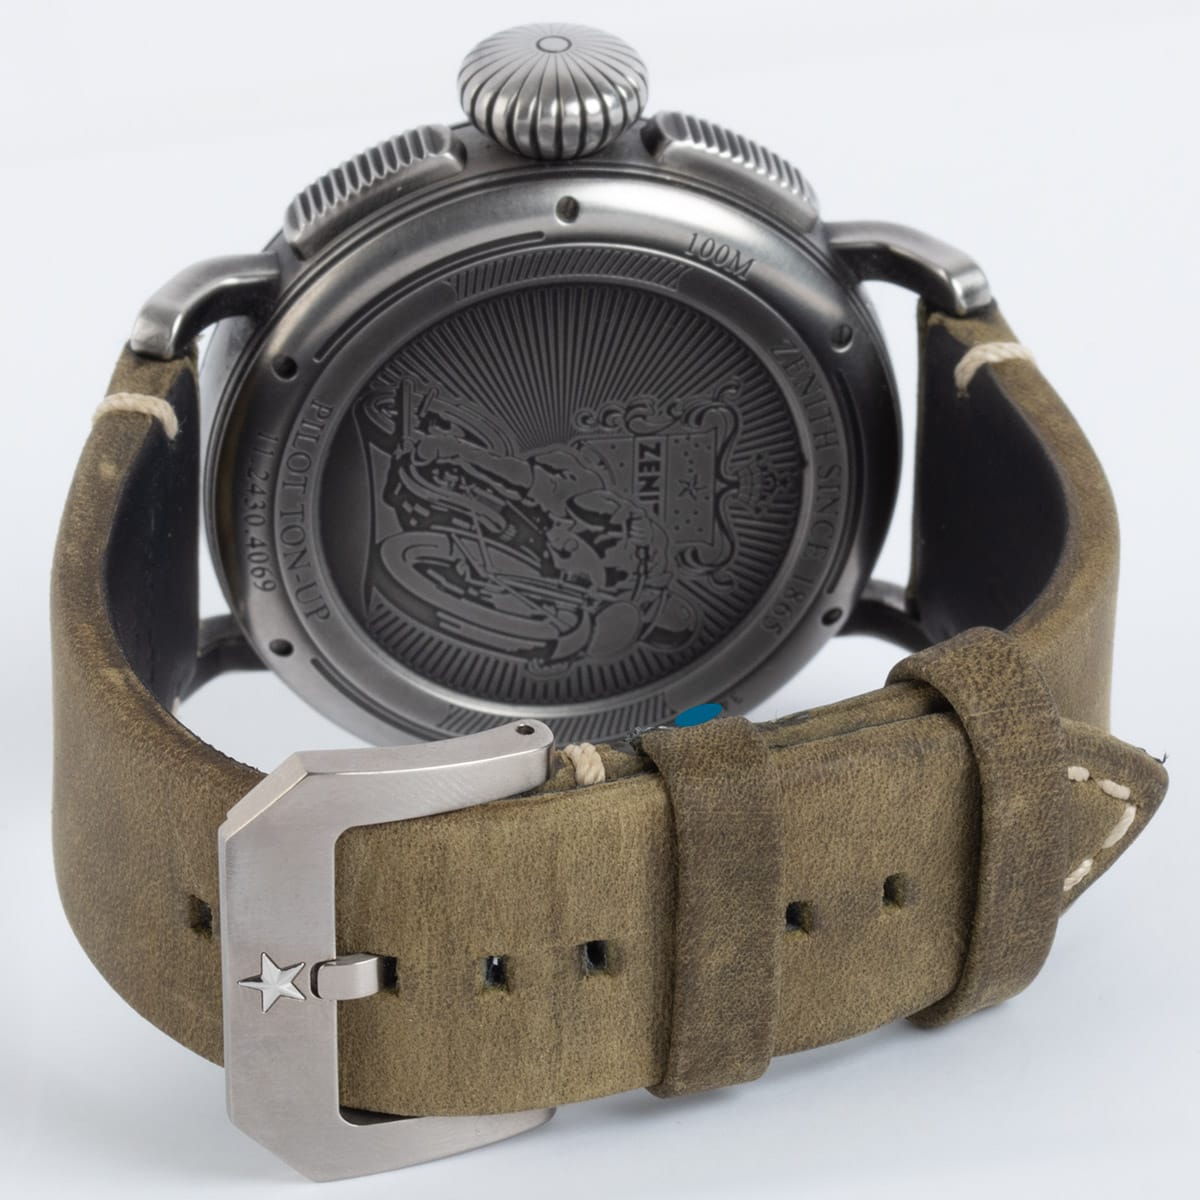 Rear / Band View of Pilot Type 20 Ton Up Chronograph